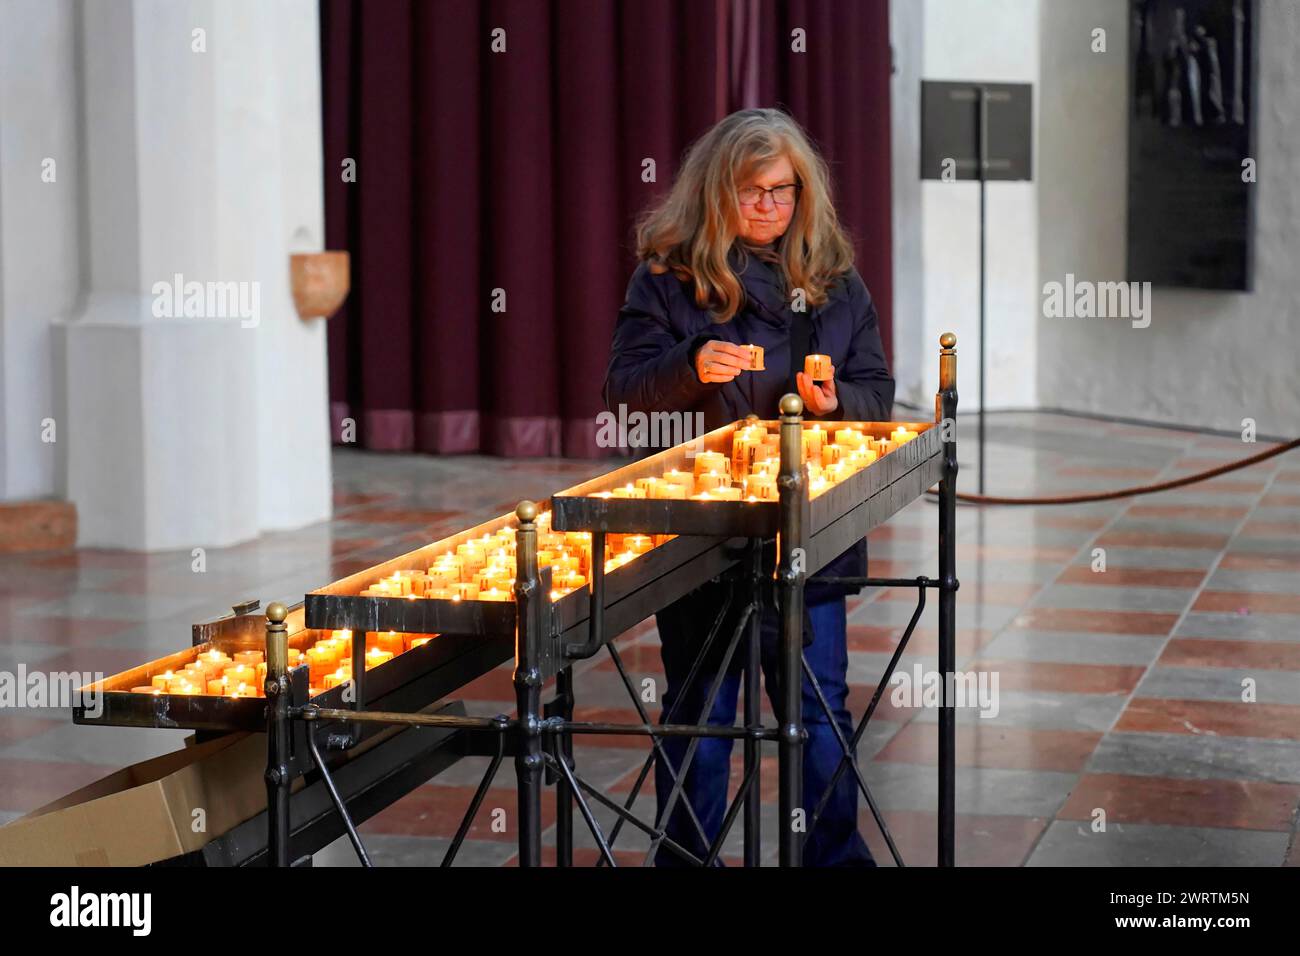 A woman lights candles in a church, in a moment of devotion, Church of Our Lady Munich, Bavaria, Germany Stock Photo